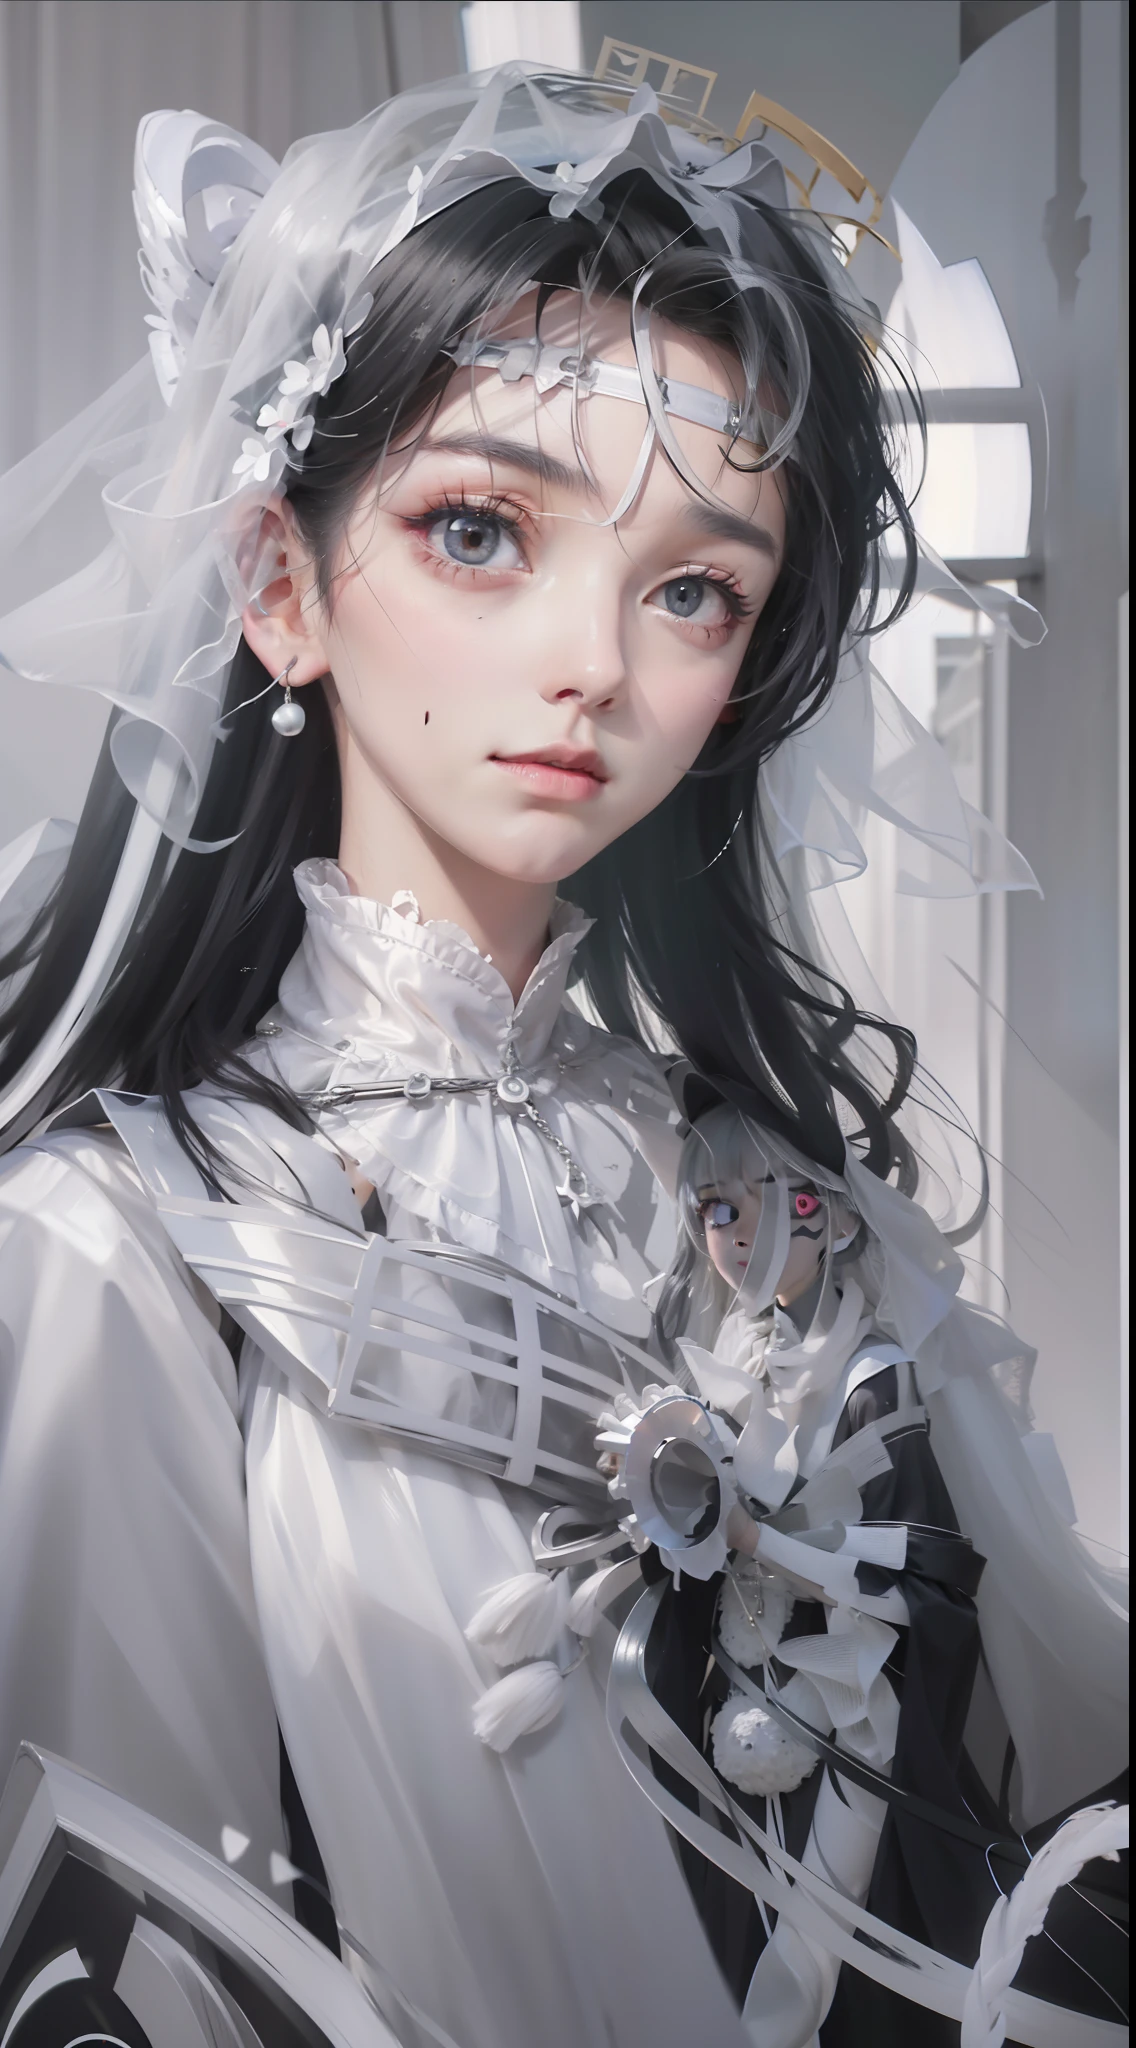 Wearing veil, gray veil, white hair, gray white, Guvez art style, arrogant and indifferent girl, half-squinted, white eyeballs, white eyes, national style, gray white, 4k, 8k rendering, real light and shadow, colorful, high quality, ethnic style, pure white background, wearing silver jewelry